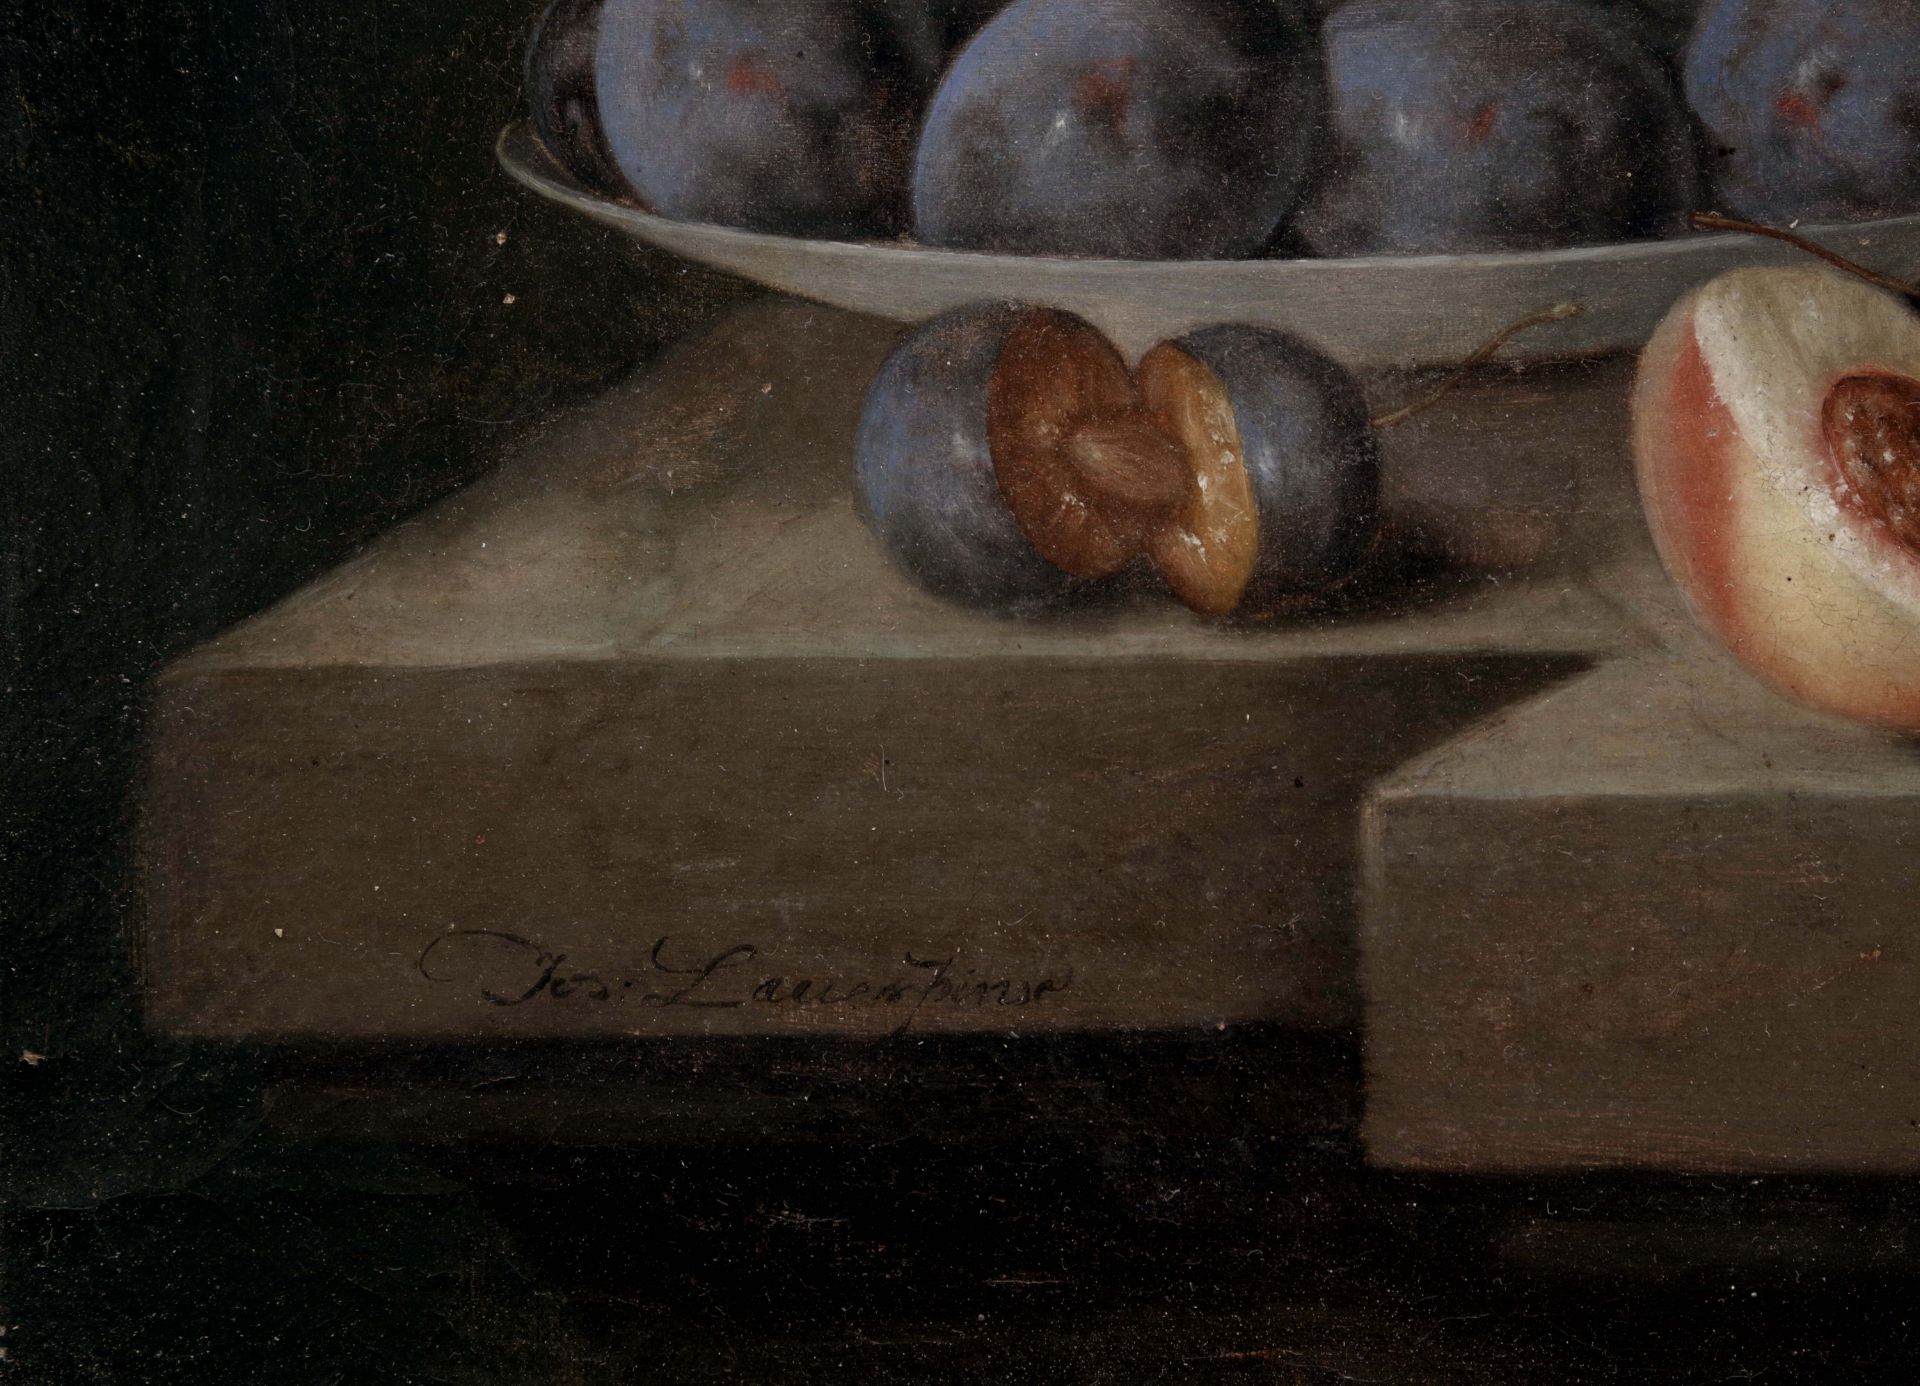 Still life with fruit, Josef Lauer - Image 3 of 5